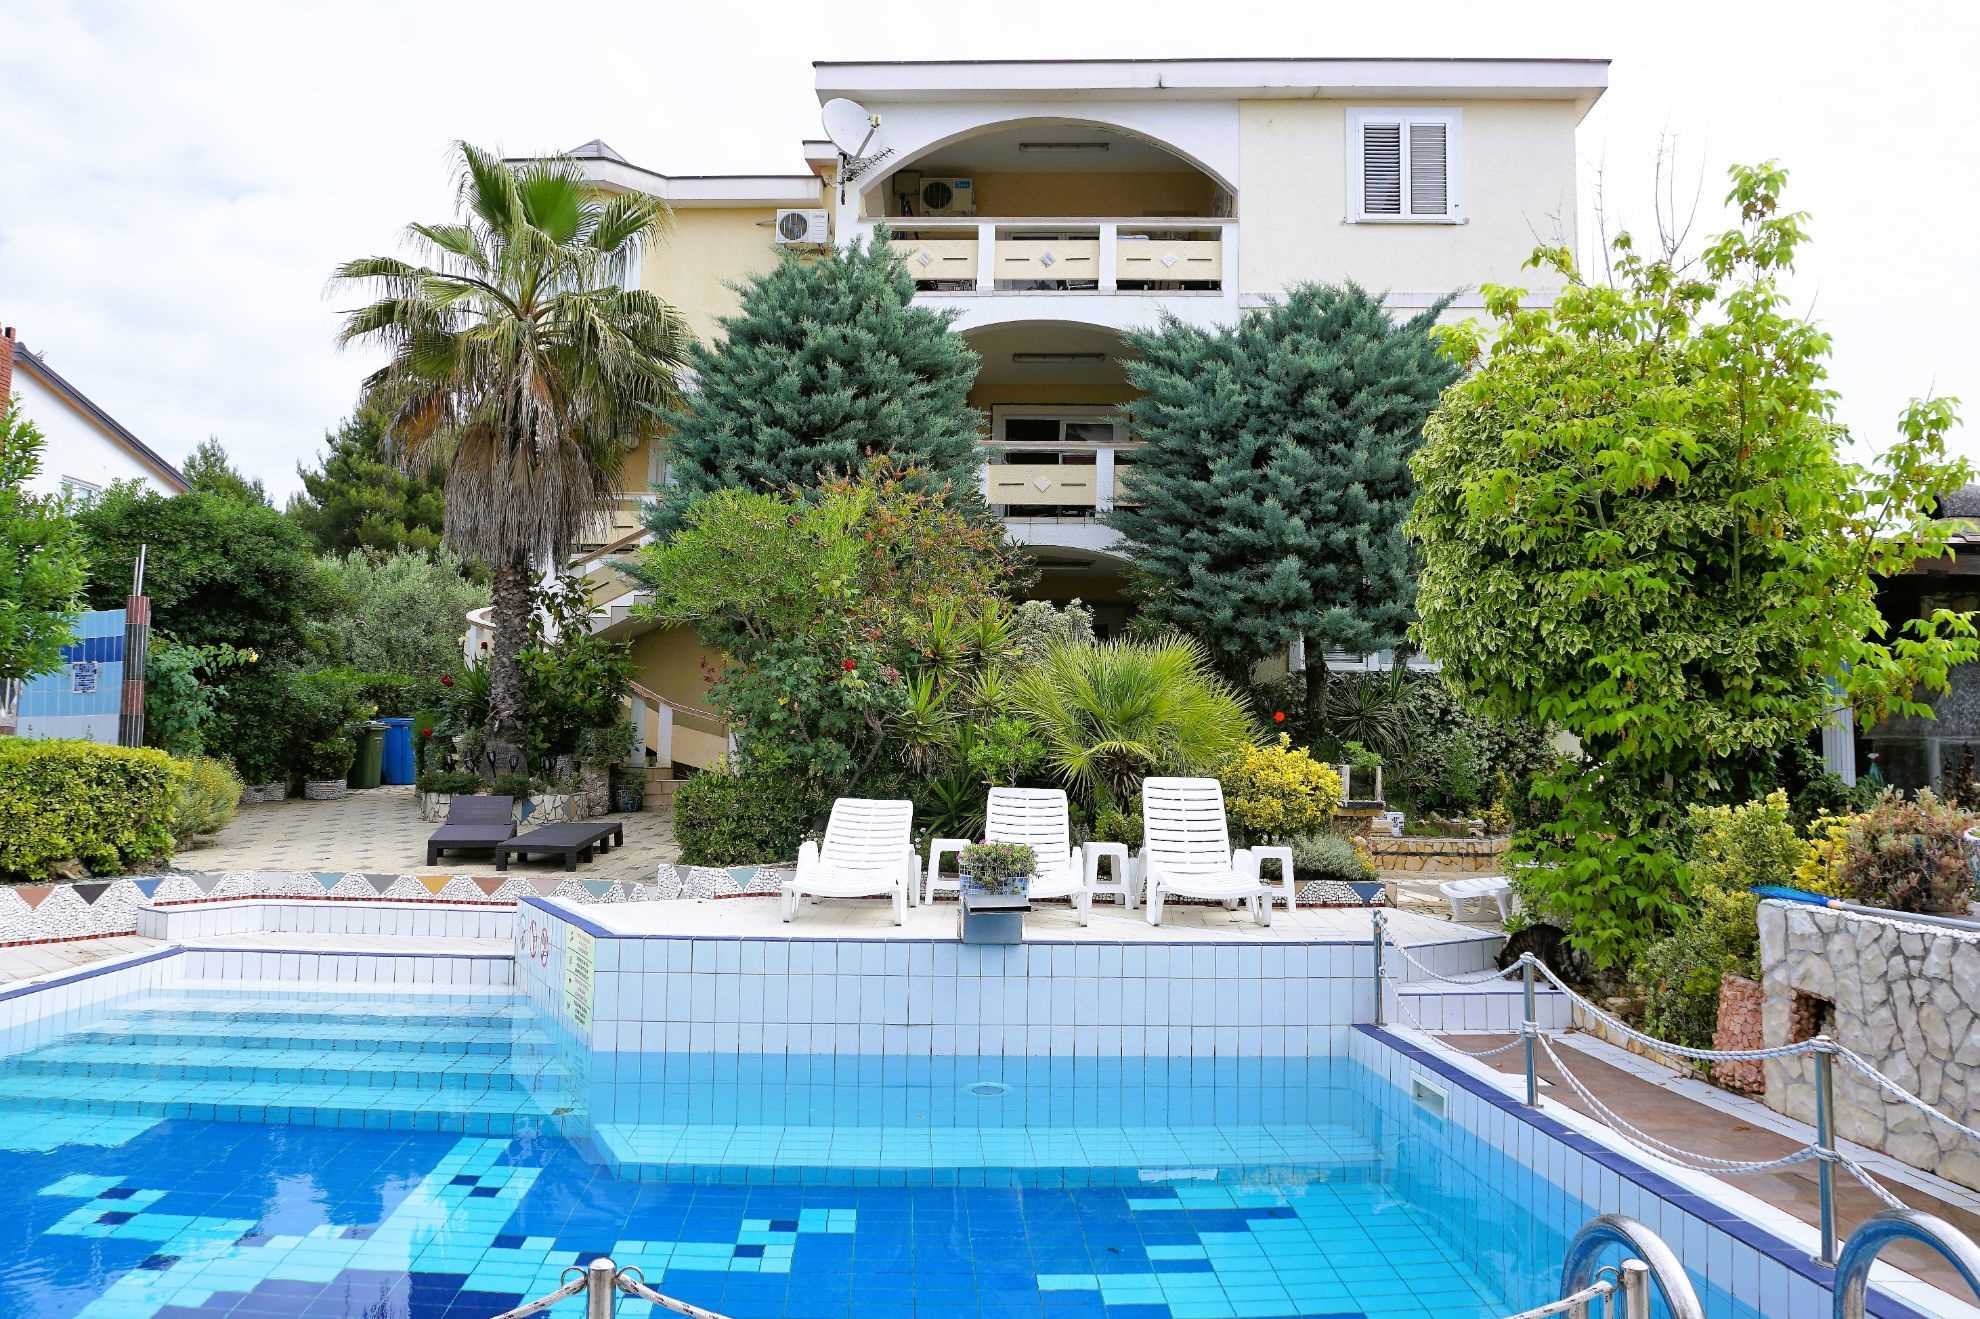 Image of Apartment Tierra 1 with swimming pool